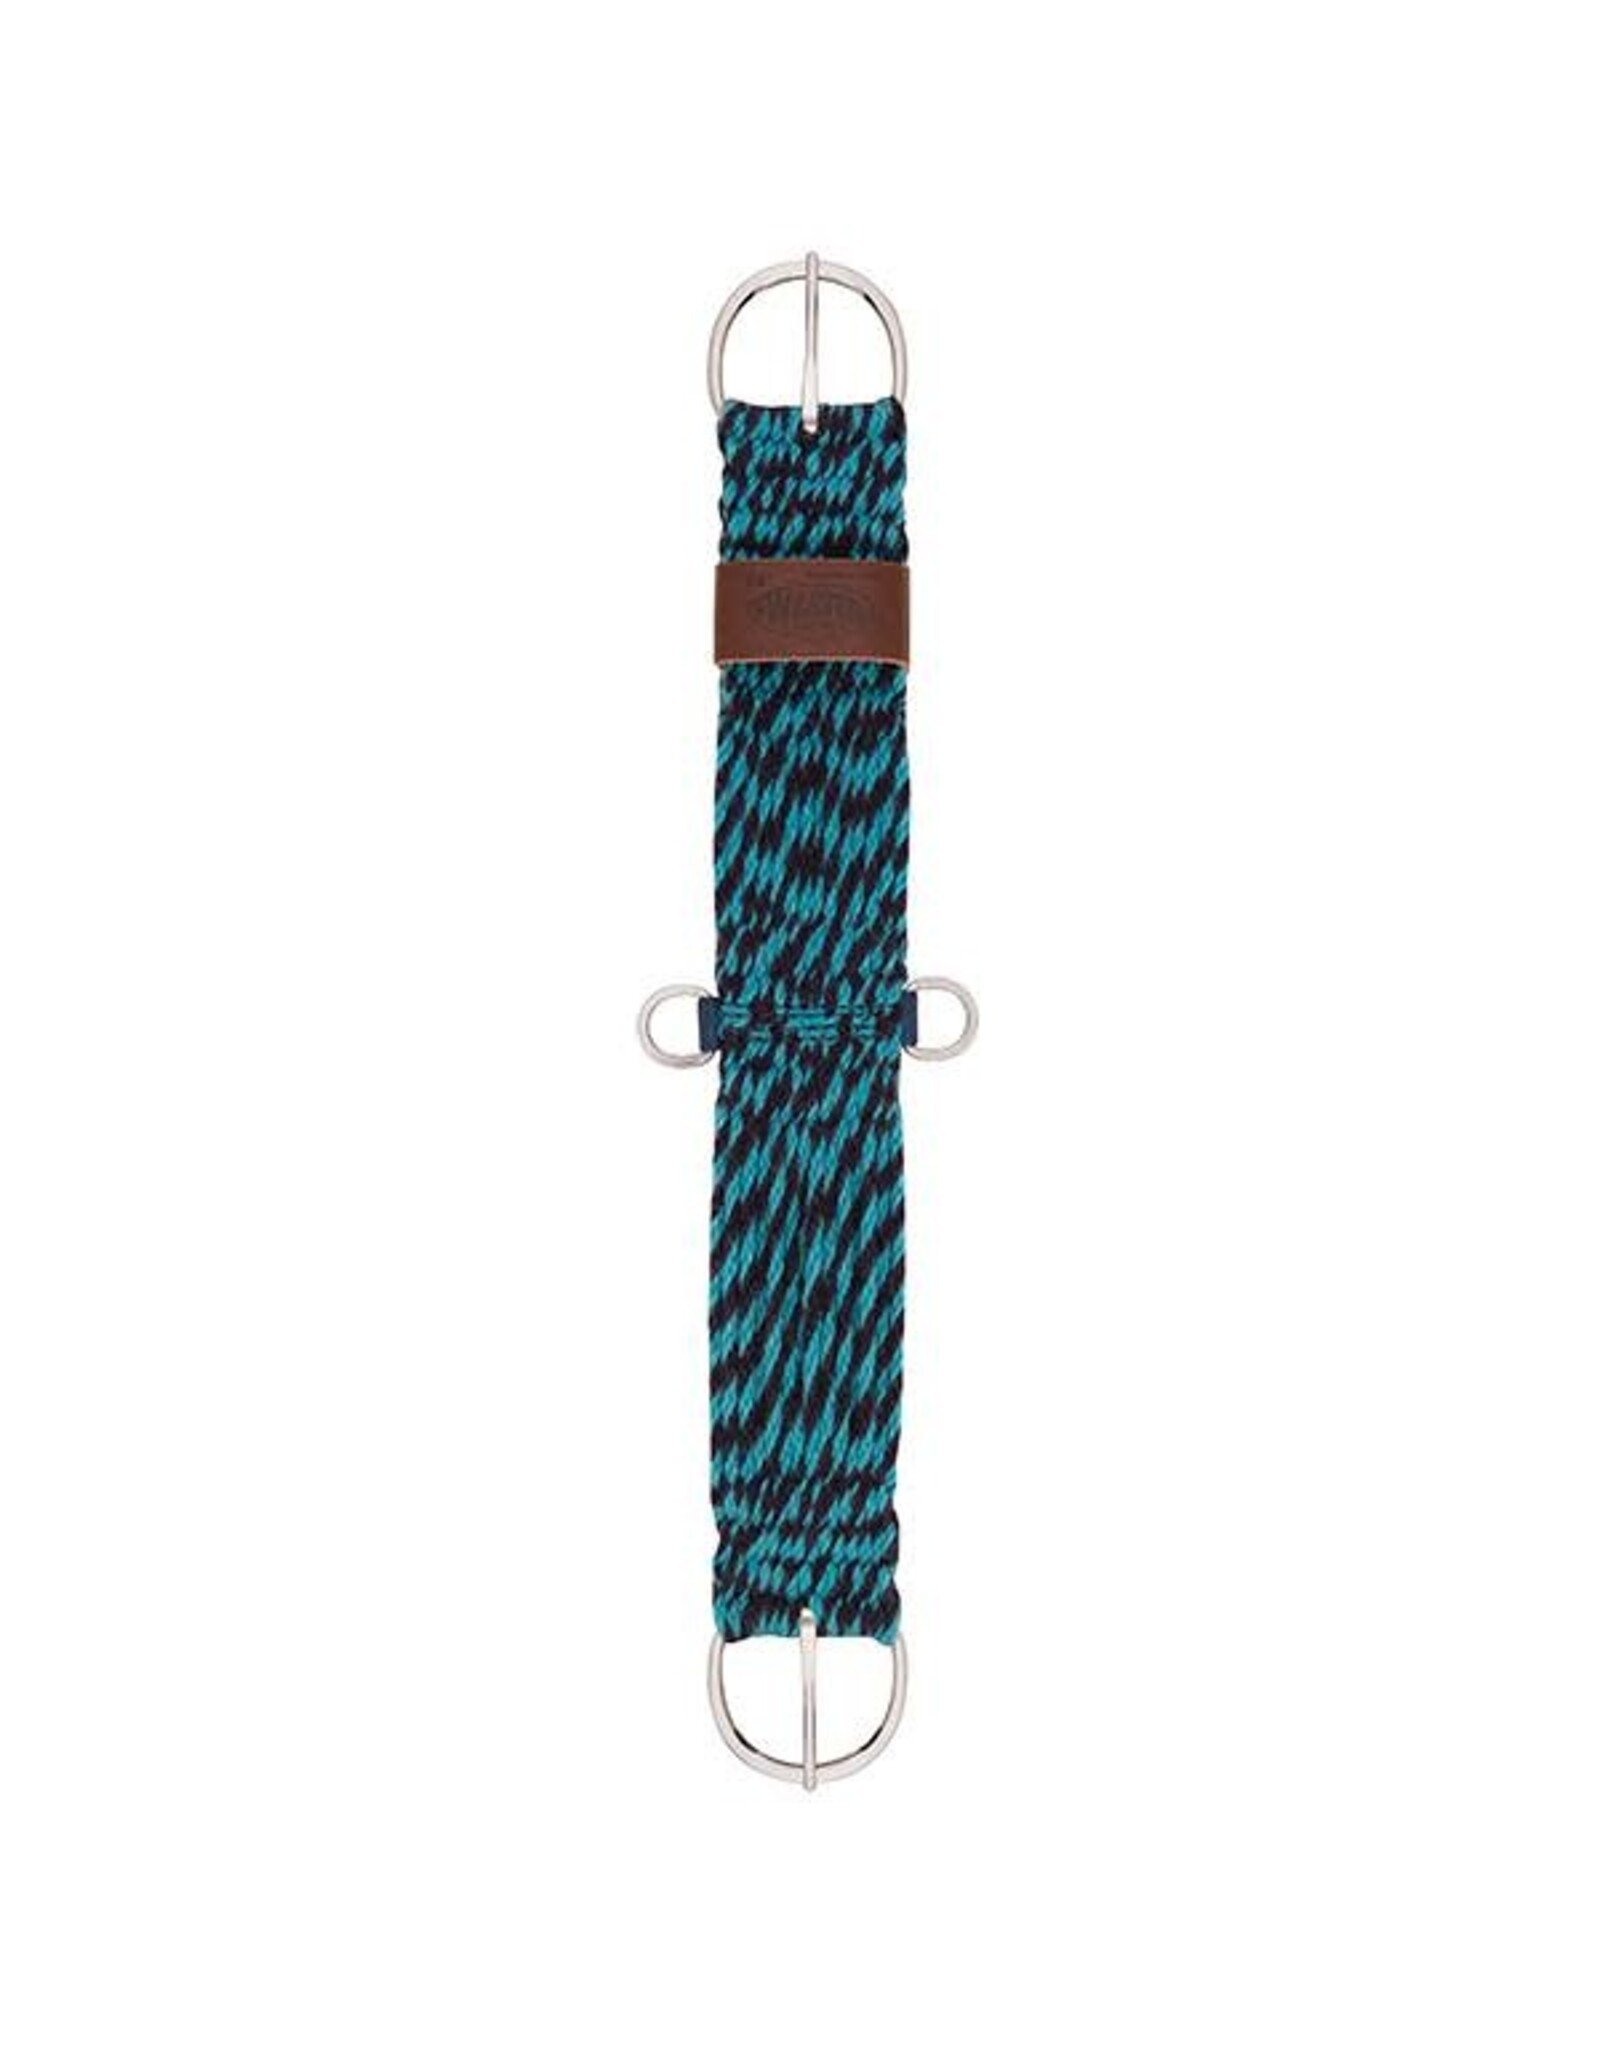 100% Mohair 27-Strand Cinch - Straight - 36" 35405-20-36-253 Navy/Turquoise